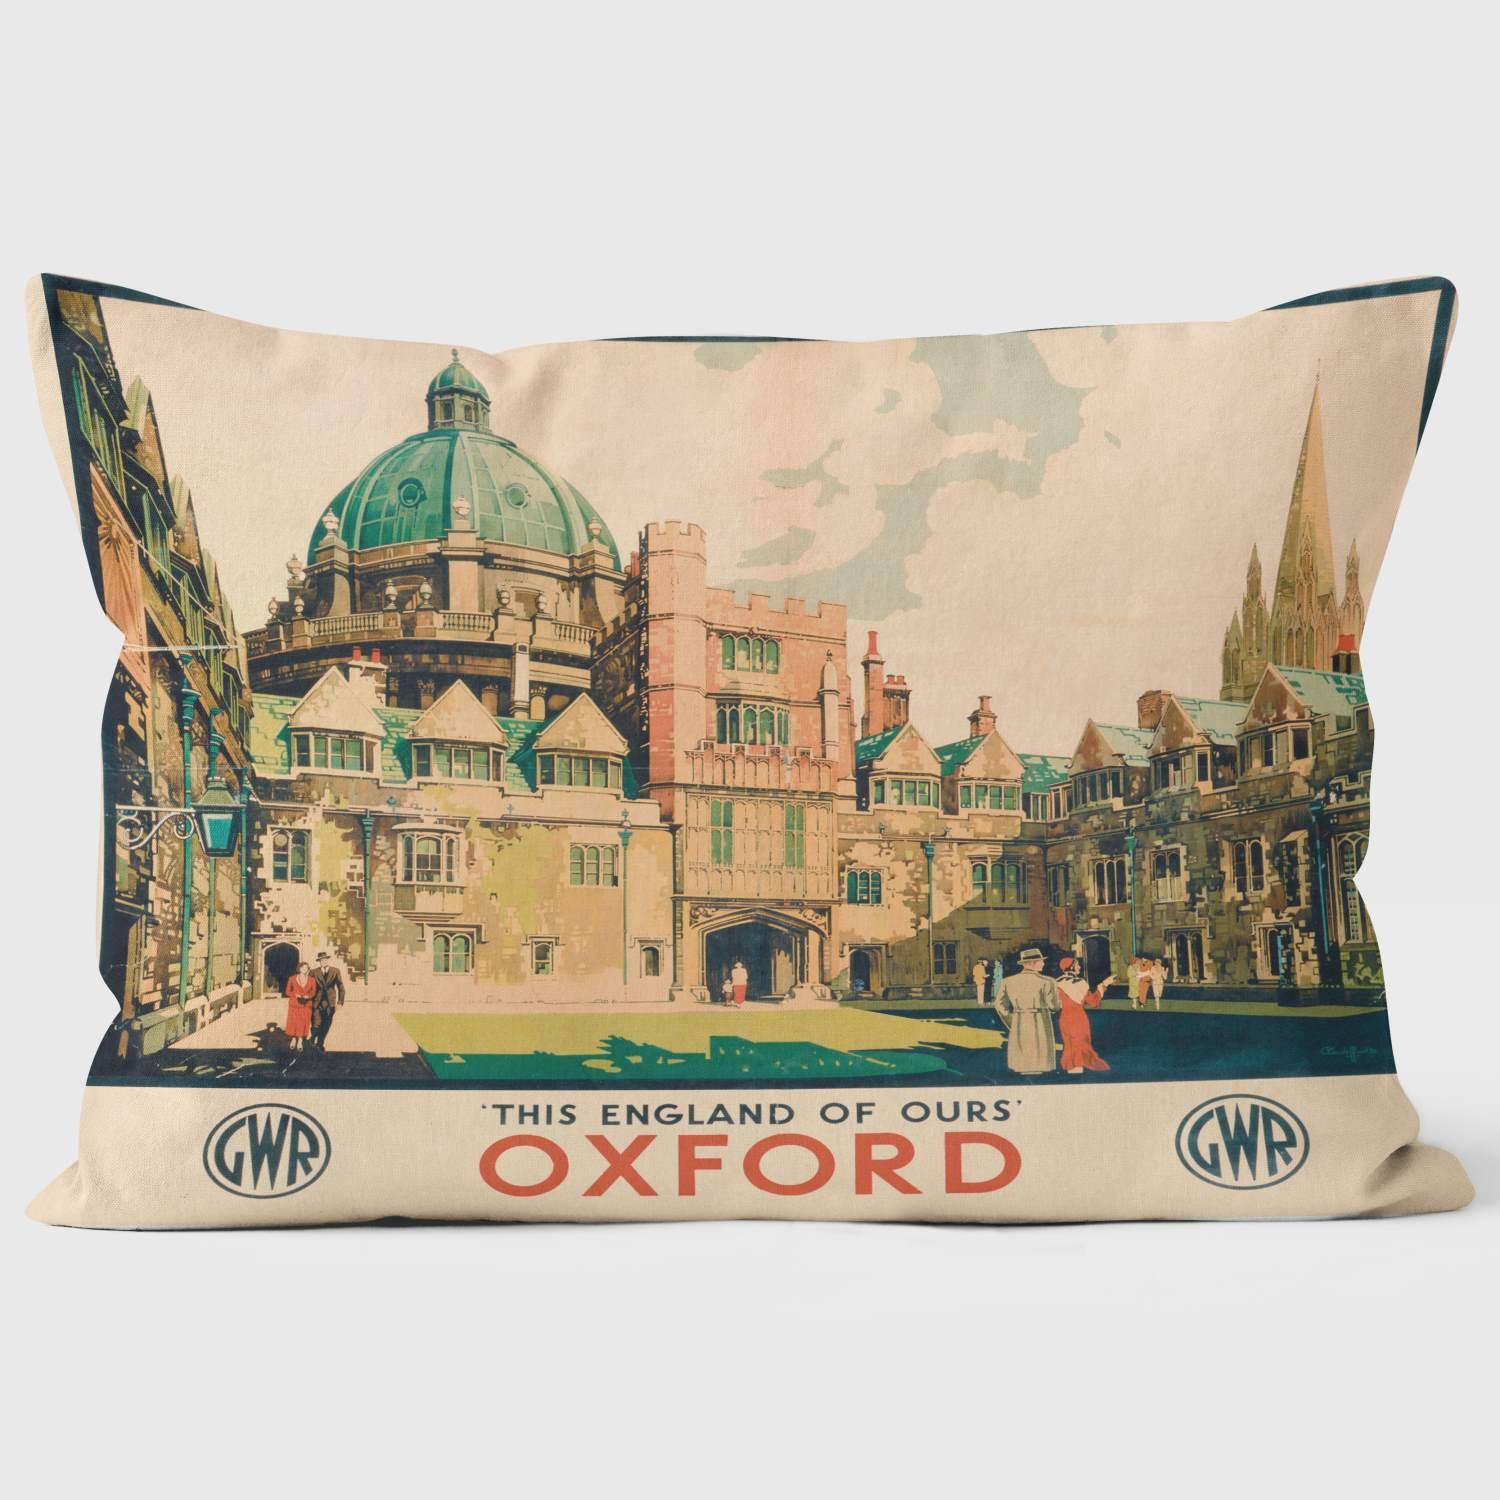 Oxford -This England Of Ours - GWR 1923-1947 - National Railway Museum Cushion - Handmade Cushions UK - WeLoveCushions